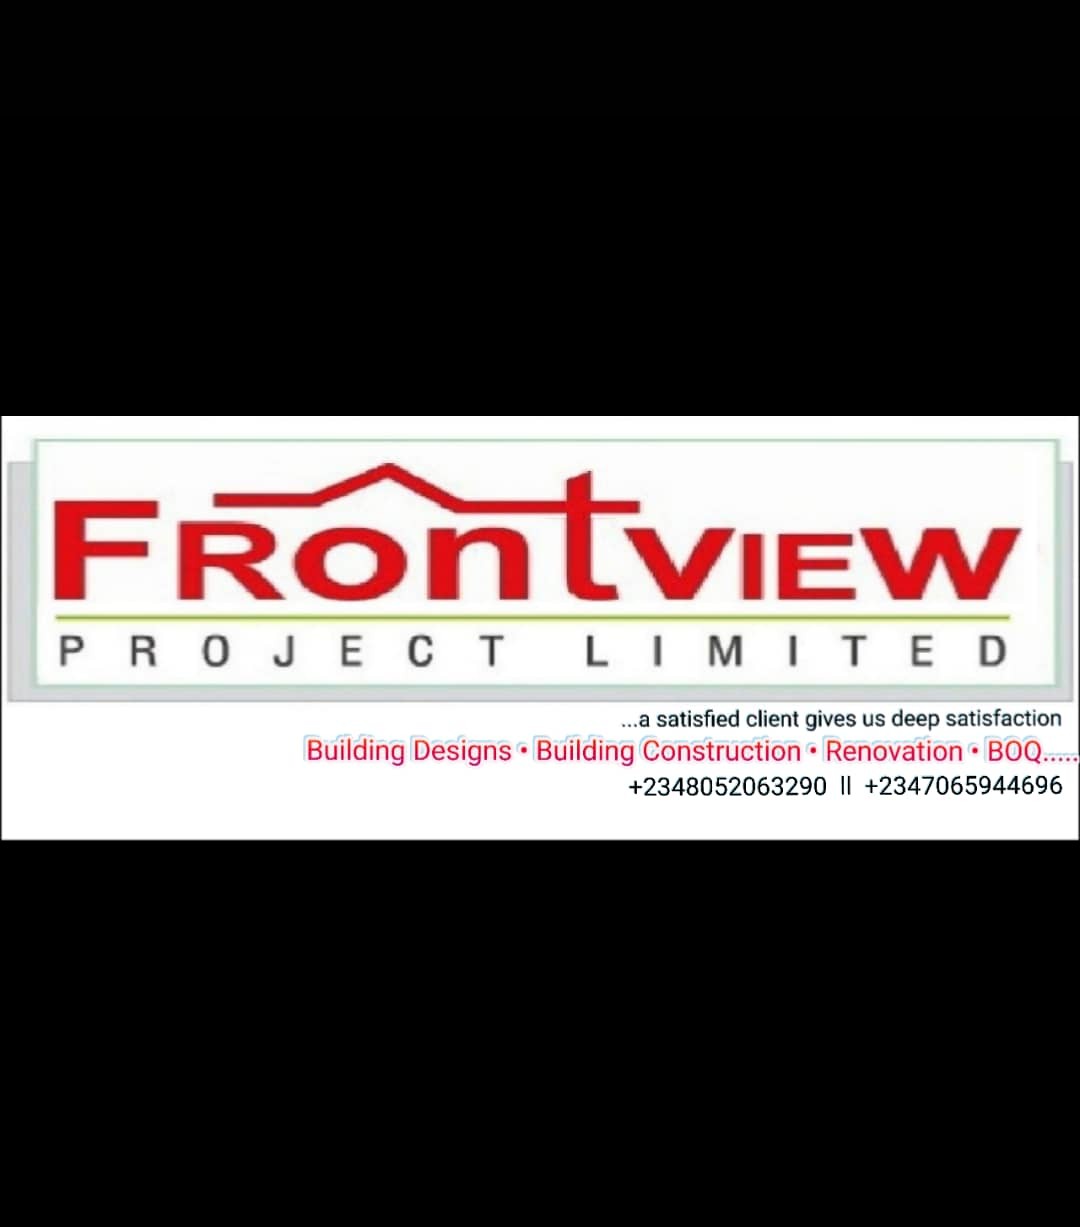 Frontview Project Ltd provider